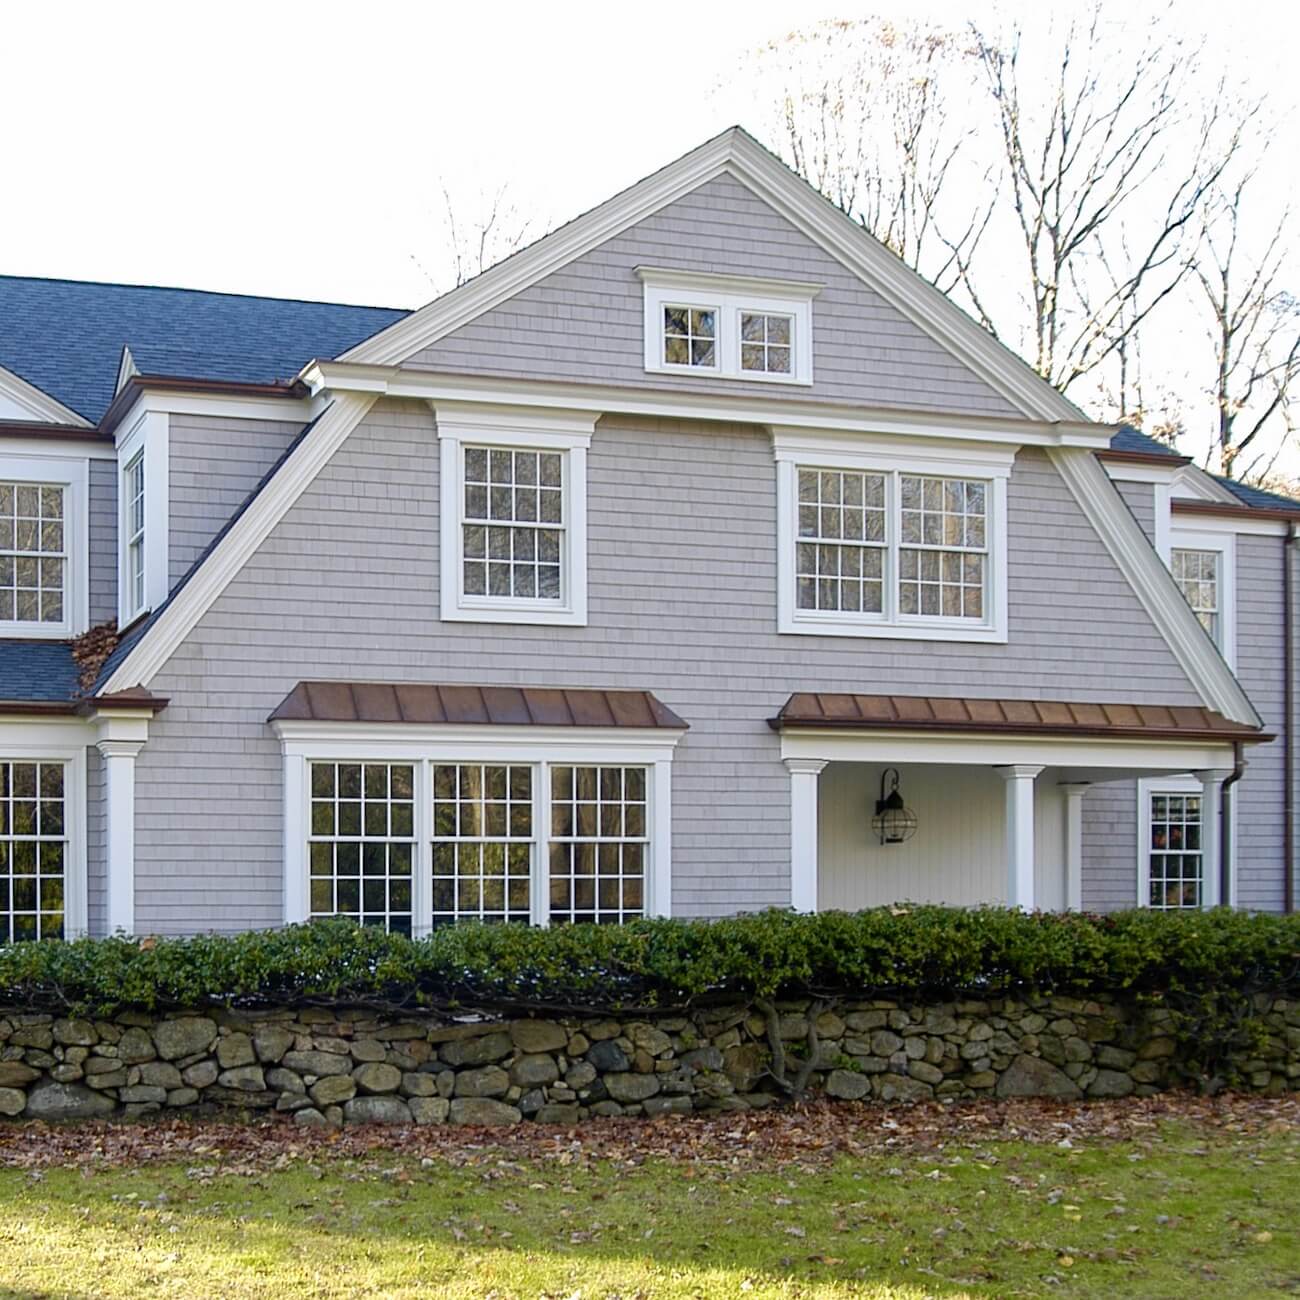 TurtleBack- Shingle Style transformation in New Canaan CT